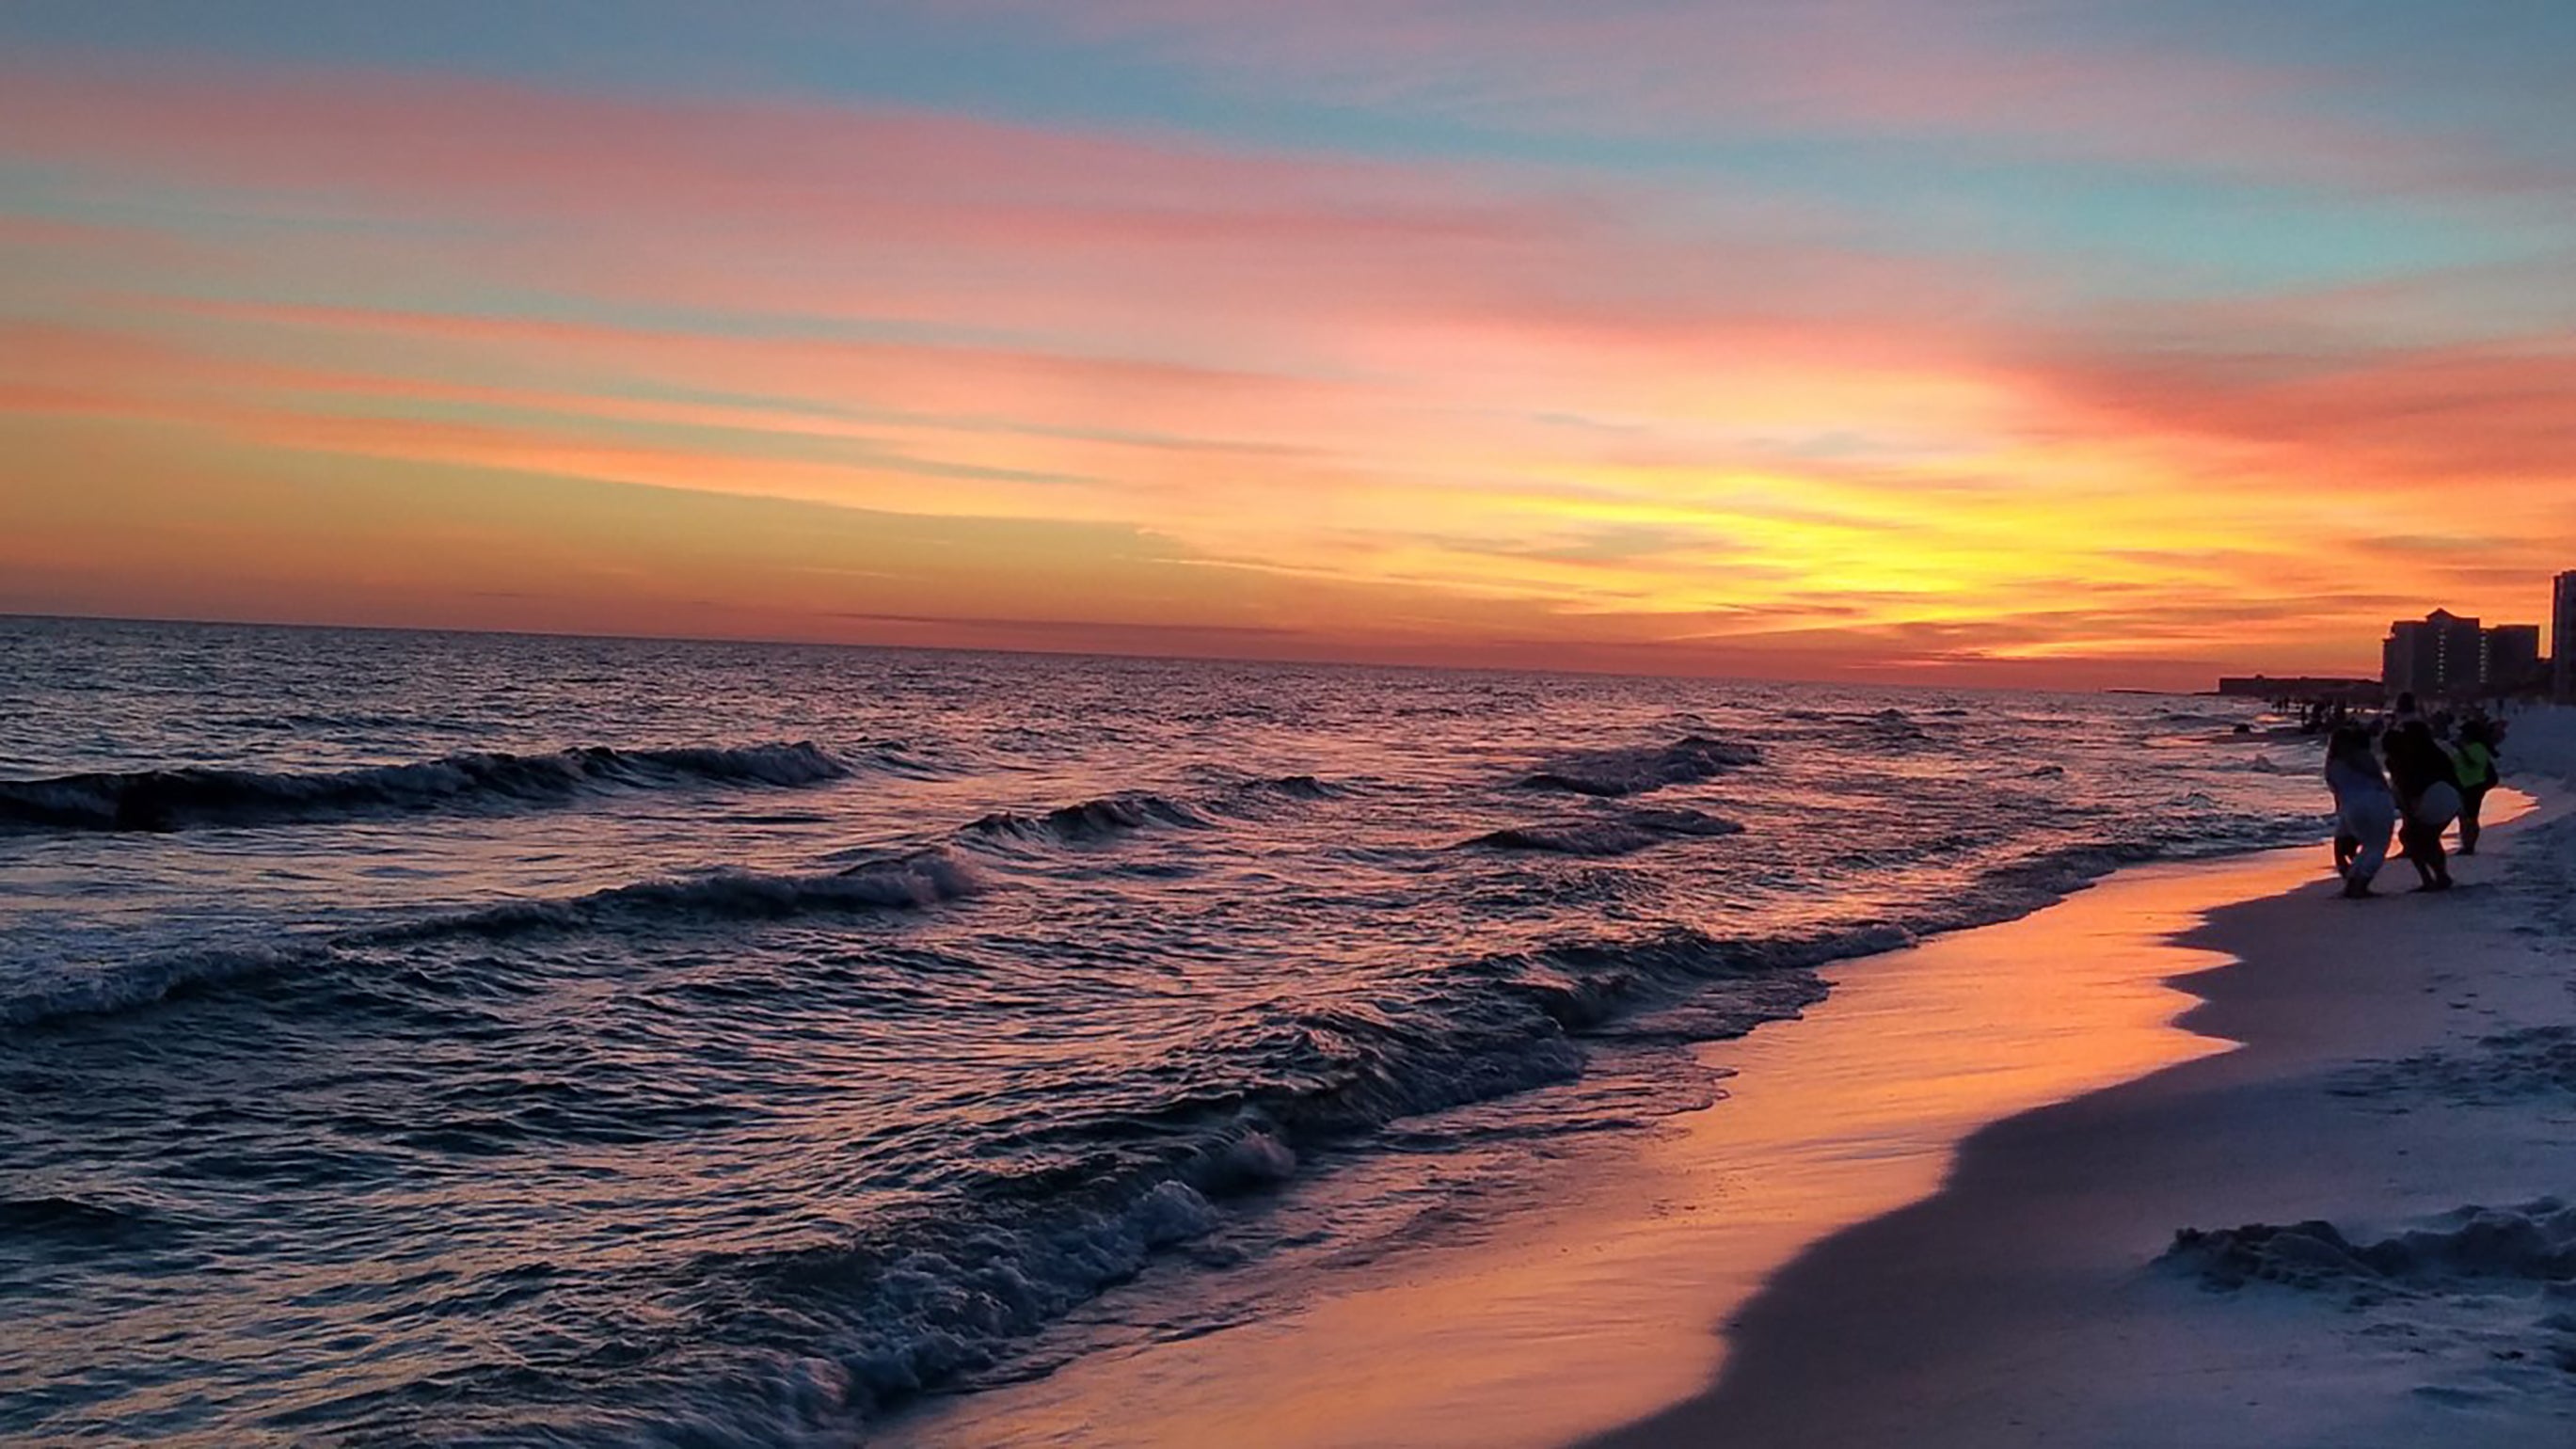 Incredible sunsets on the beach